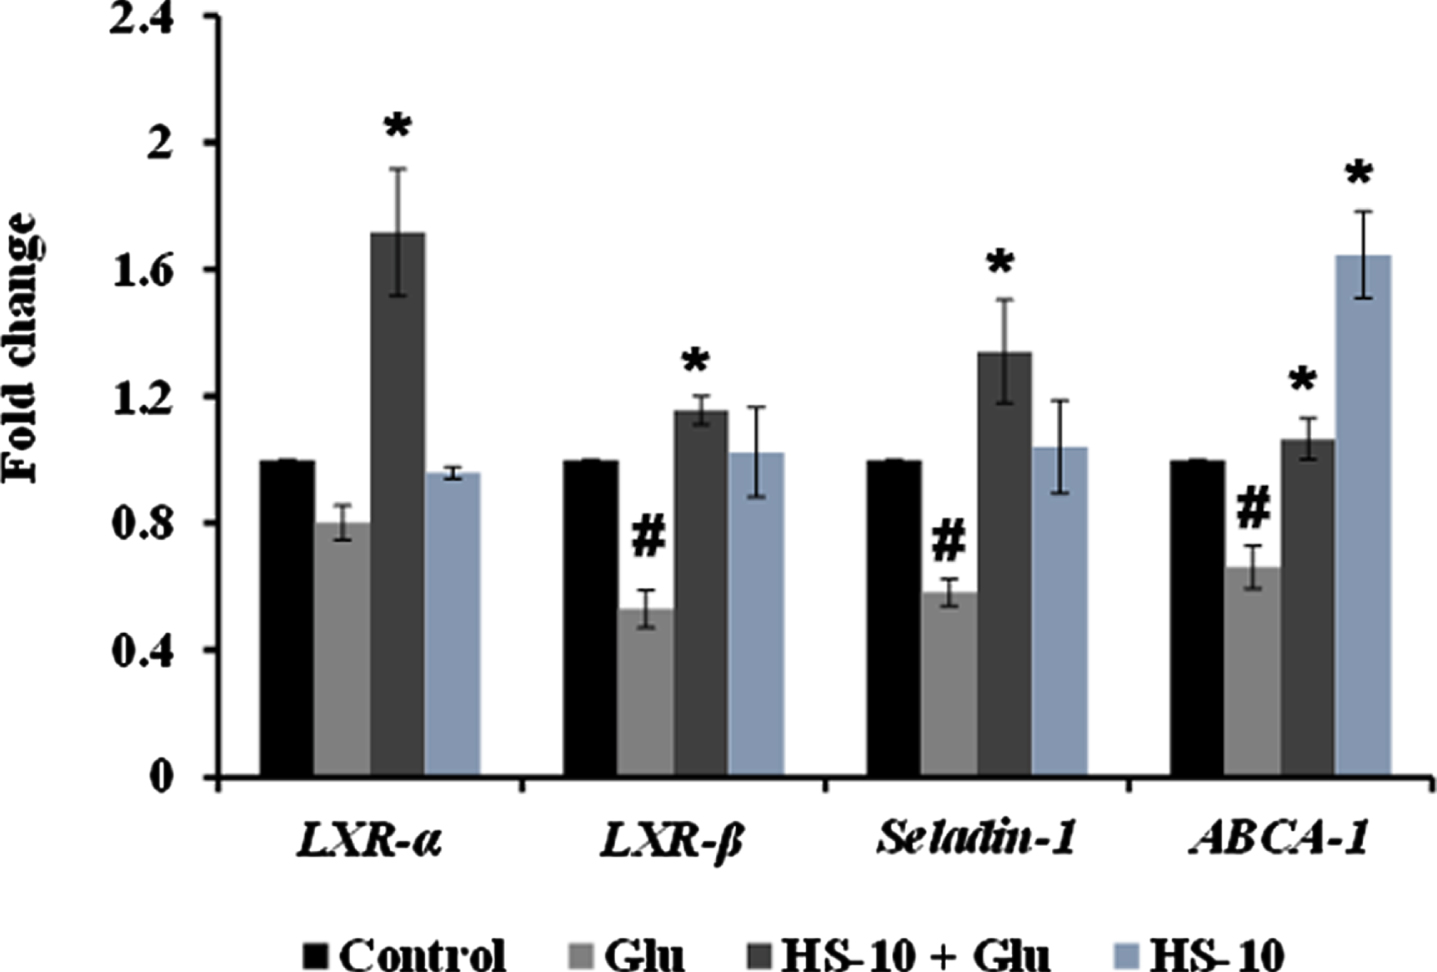 Transcriptional regulation of glucose and lipid metabolism associated genes (LXR-
α, LXR-
β, Seladin-1, and ABCA-1) by HS extract (Significance at p < 0.05; # Control vs High glucose; * High glucose vs HS pre-treated; n = 3).